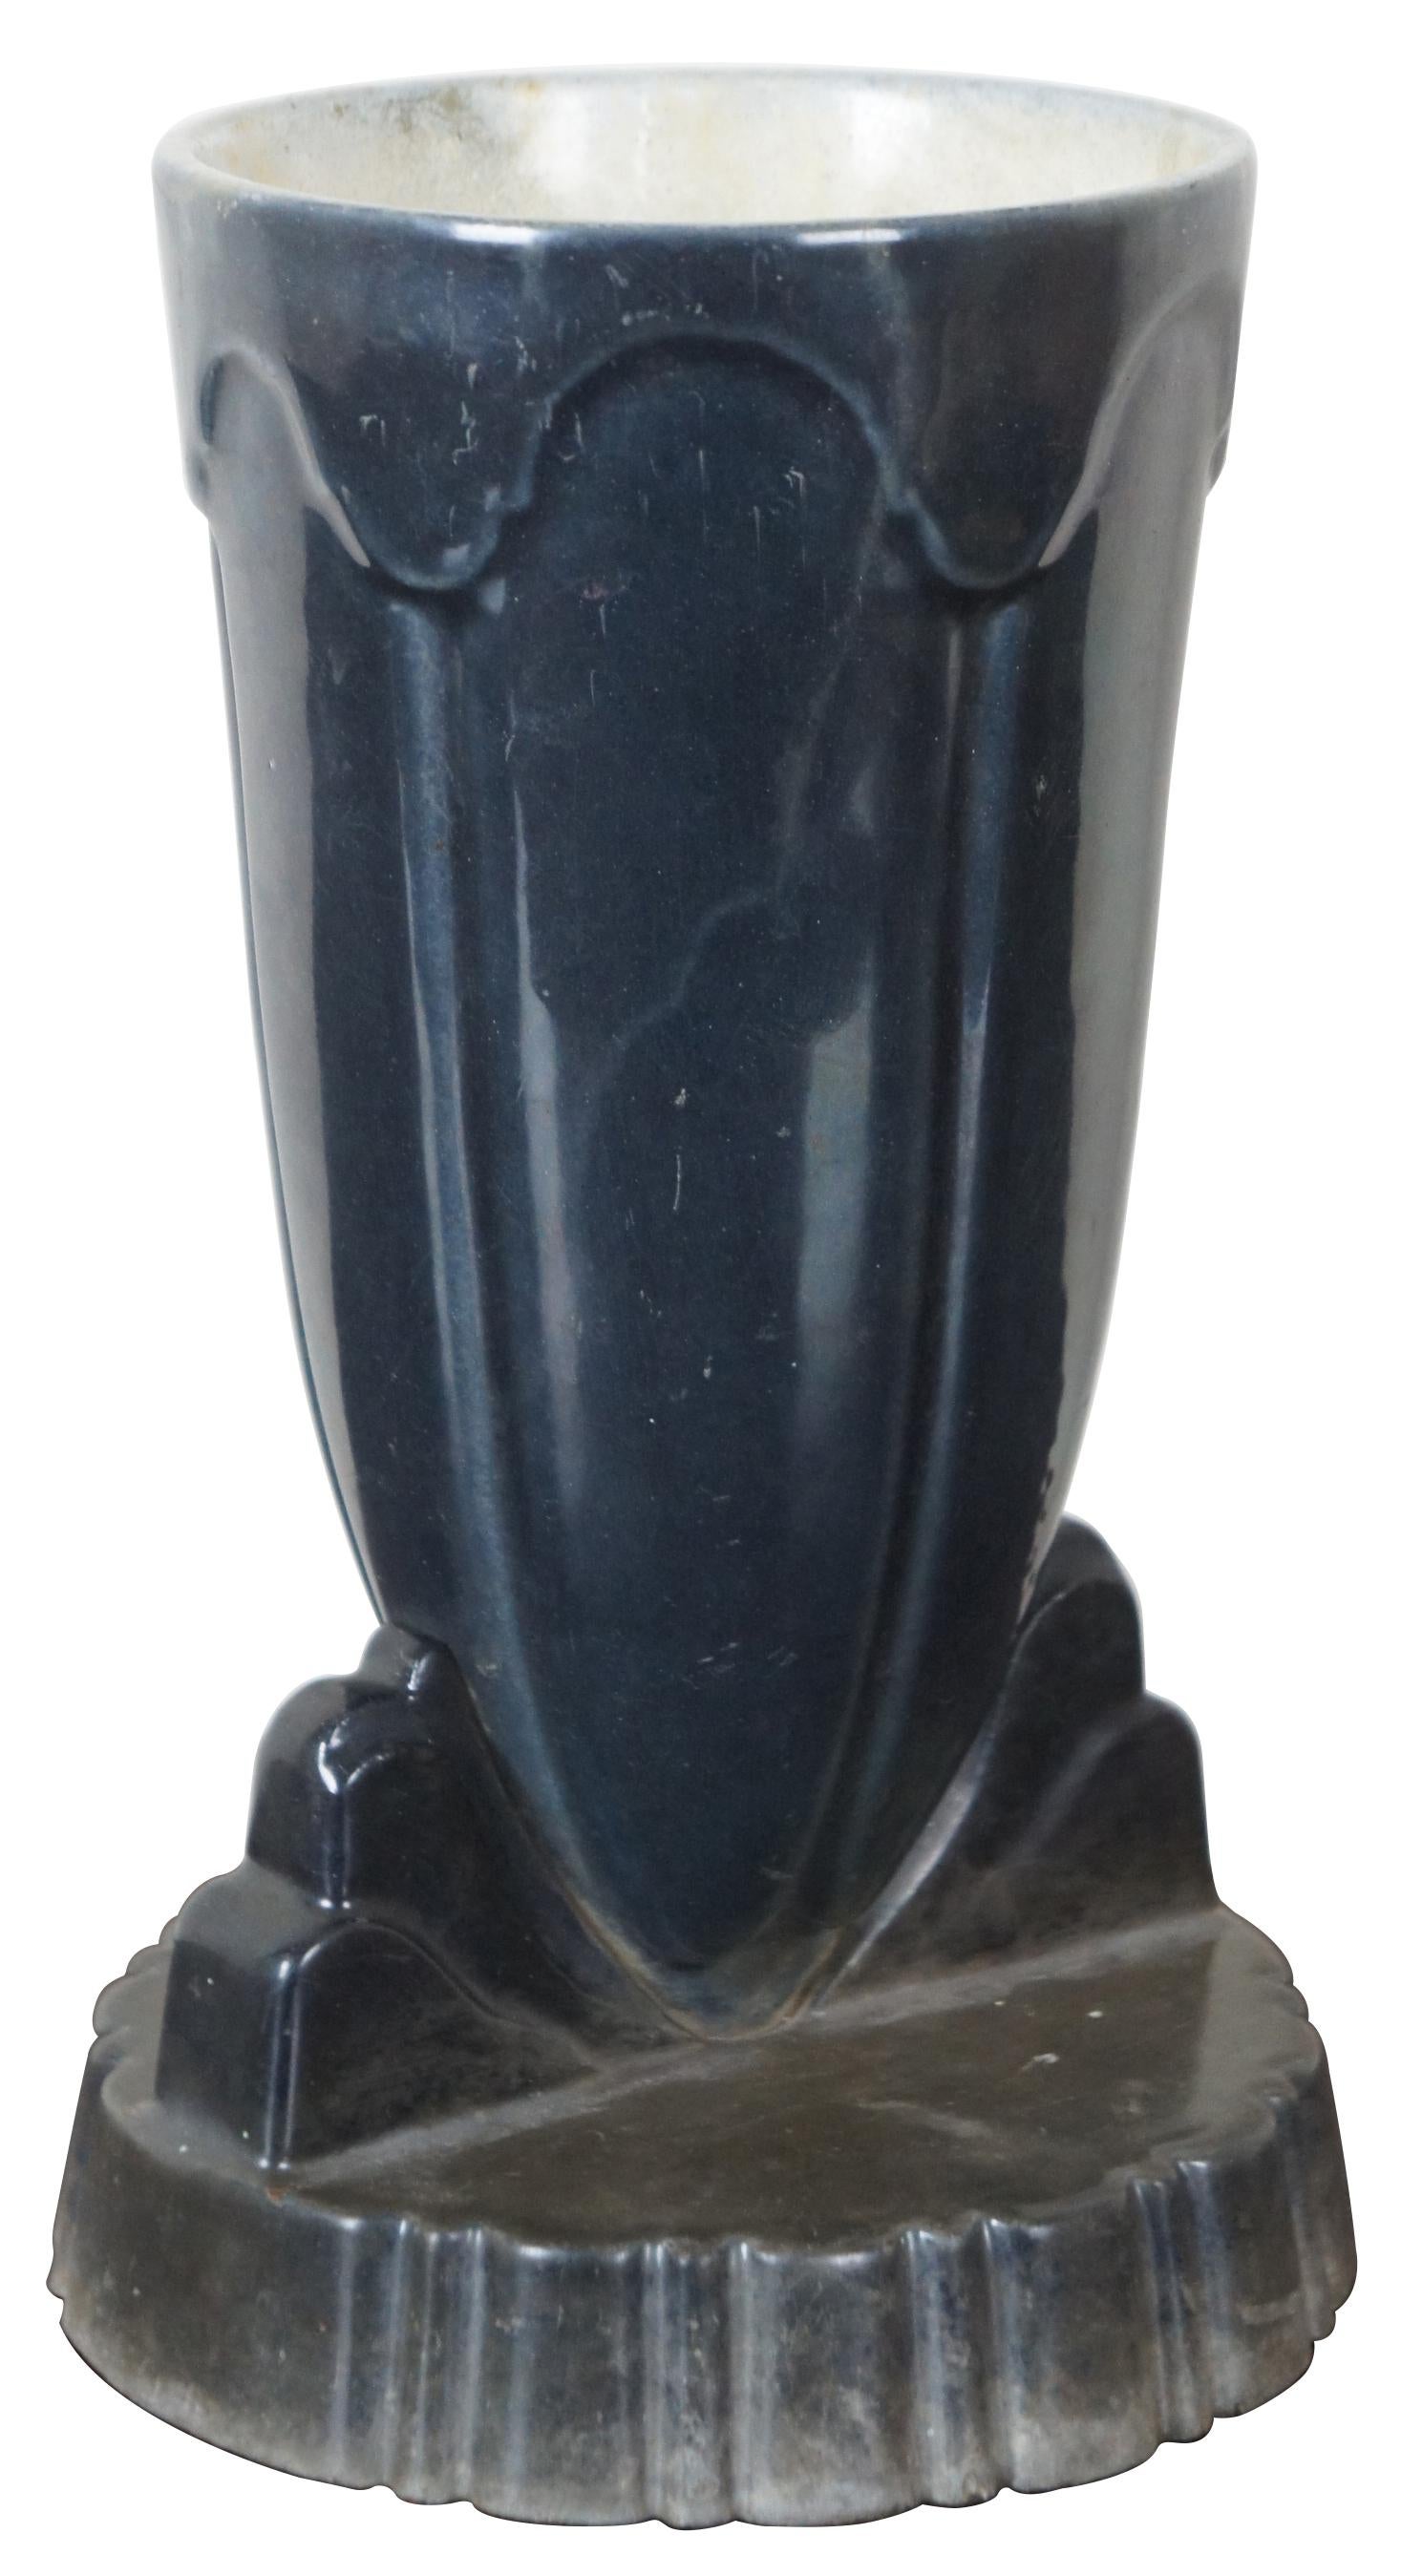 Vintage Art Deco enameled heavy black or charcoal gray cast iron trophy urn or planter with round pedestal base.
 